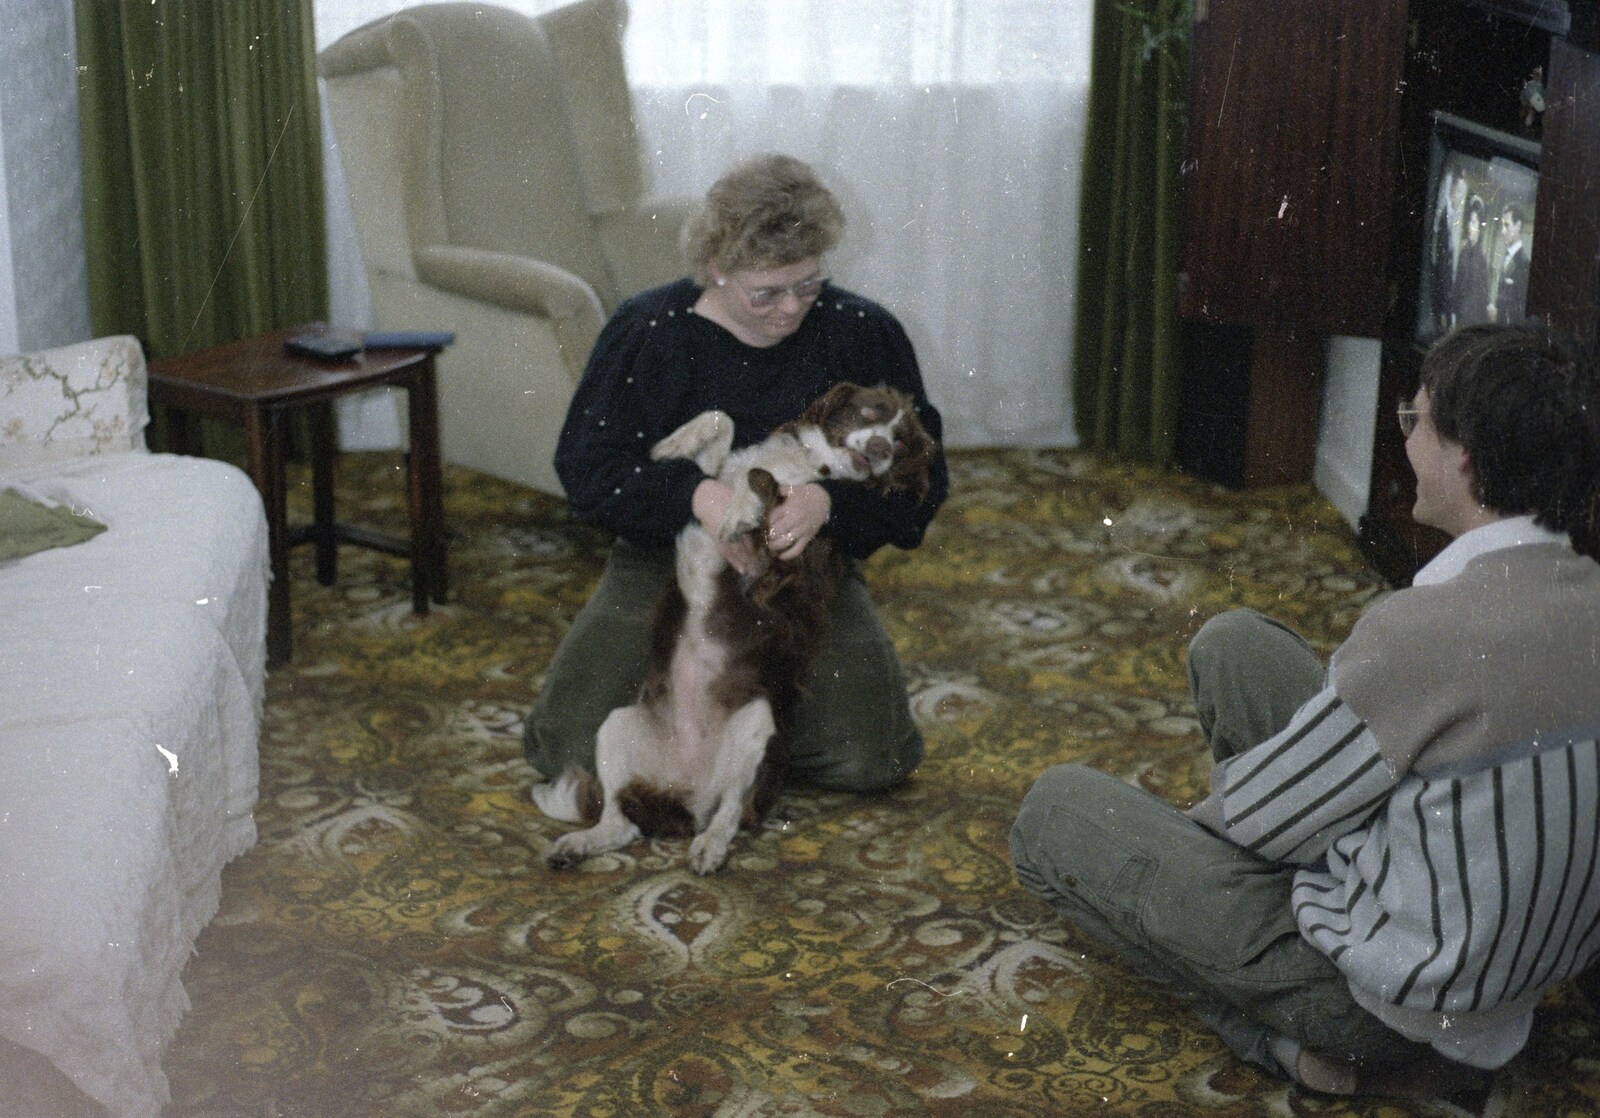 Anna's sister, Nikki, plays with Sally the dog from Brockenhurst College Exams and Miscellany, Barton on Sea, Hampshire - 10th June 1985